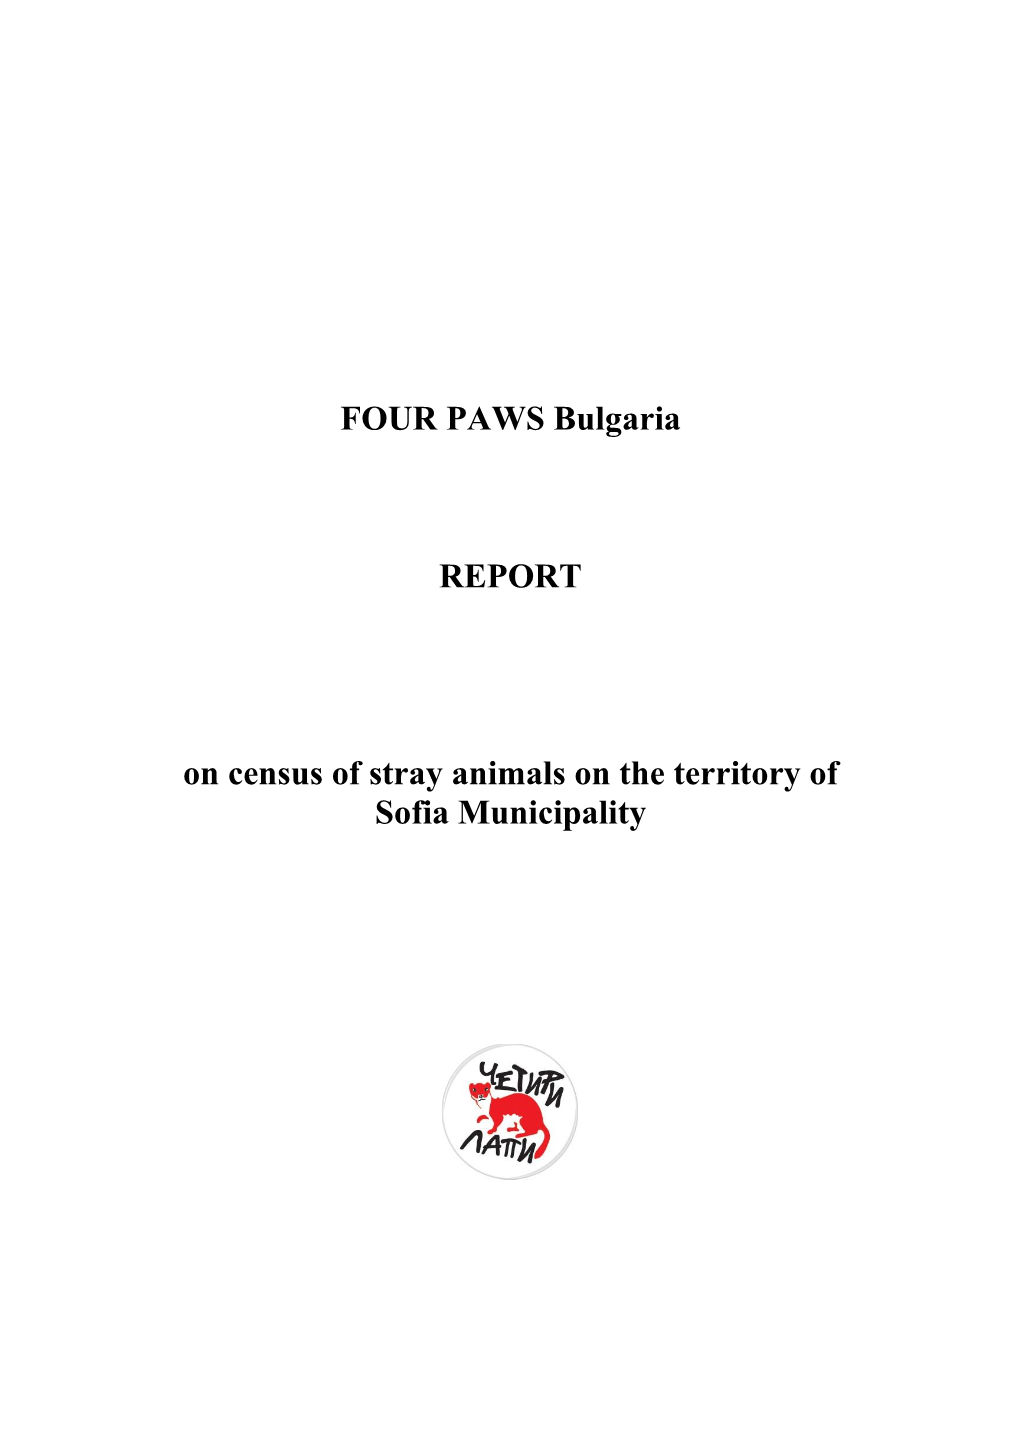 FOUR PAWS Bulgaria REPORT on Census of Stray Animals